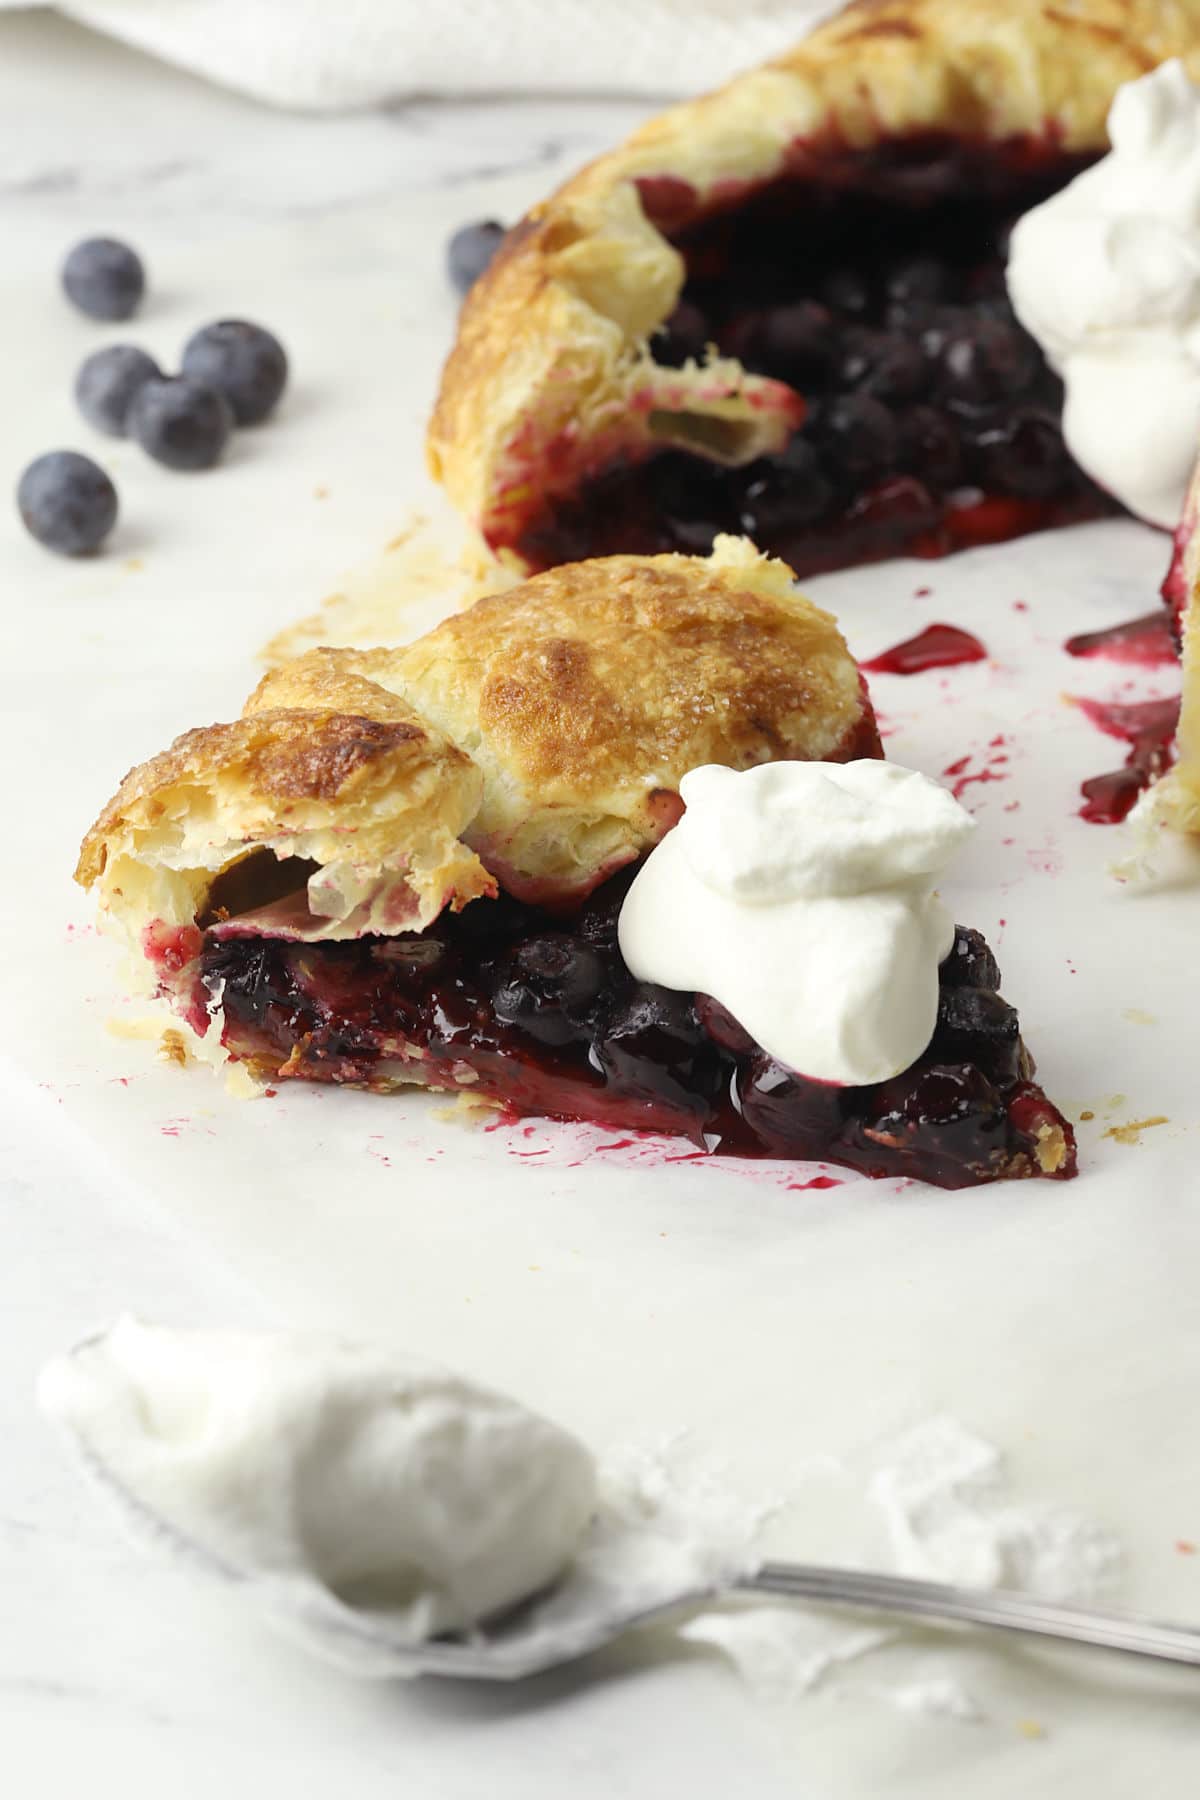 A slice of puff pastry blueberry galette topped with whipped cream.